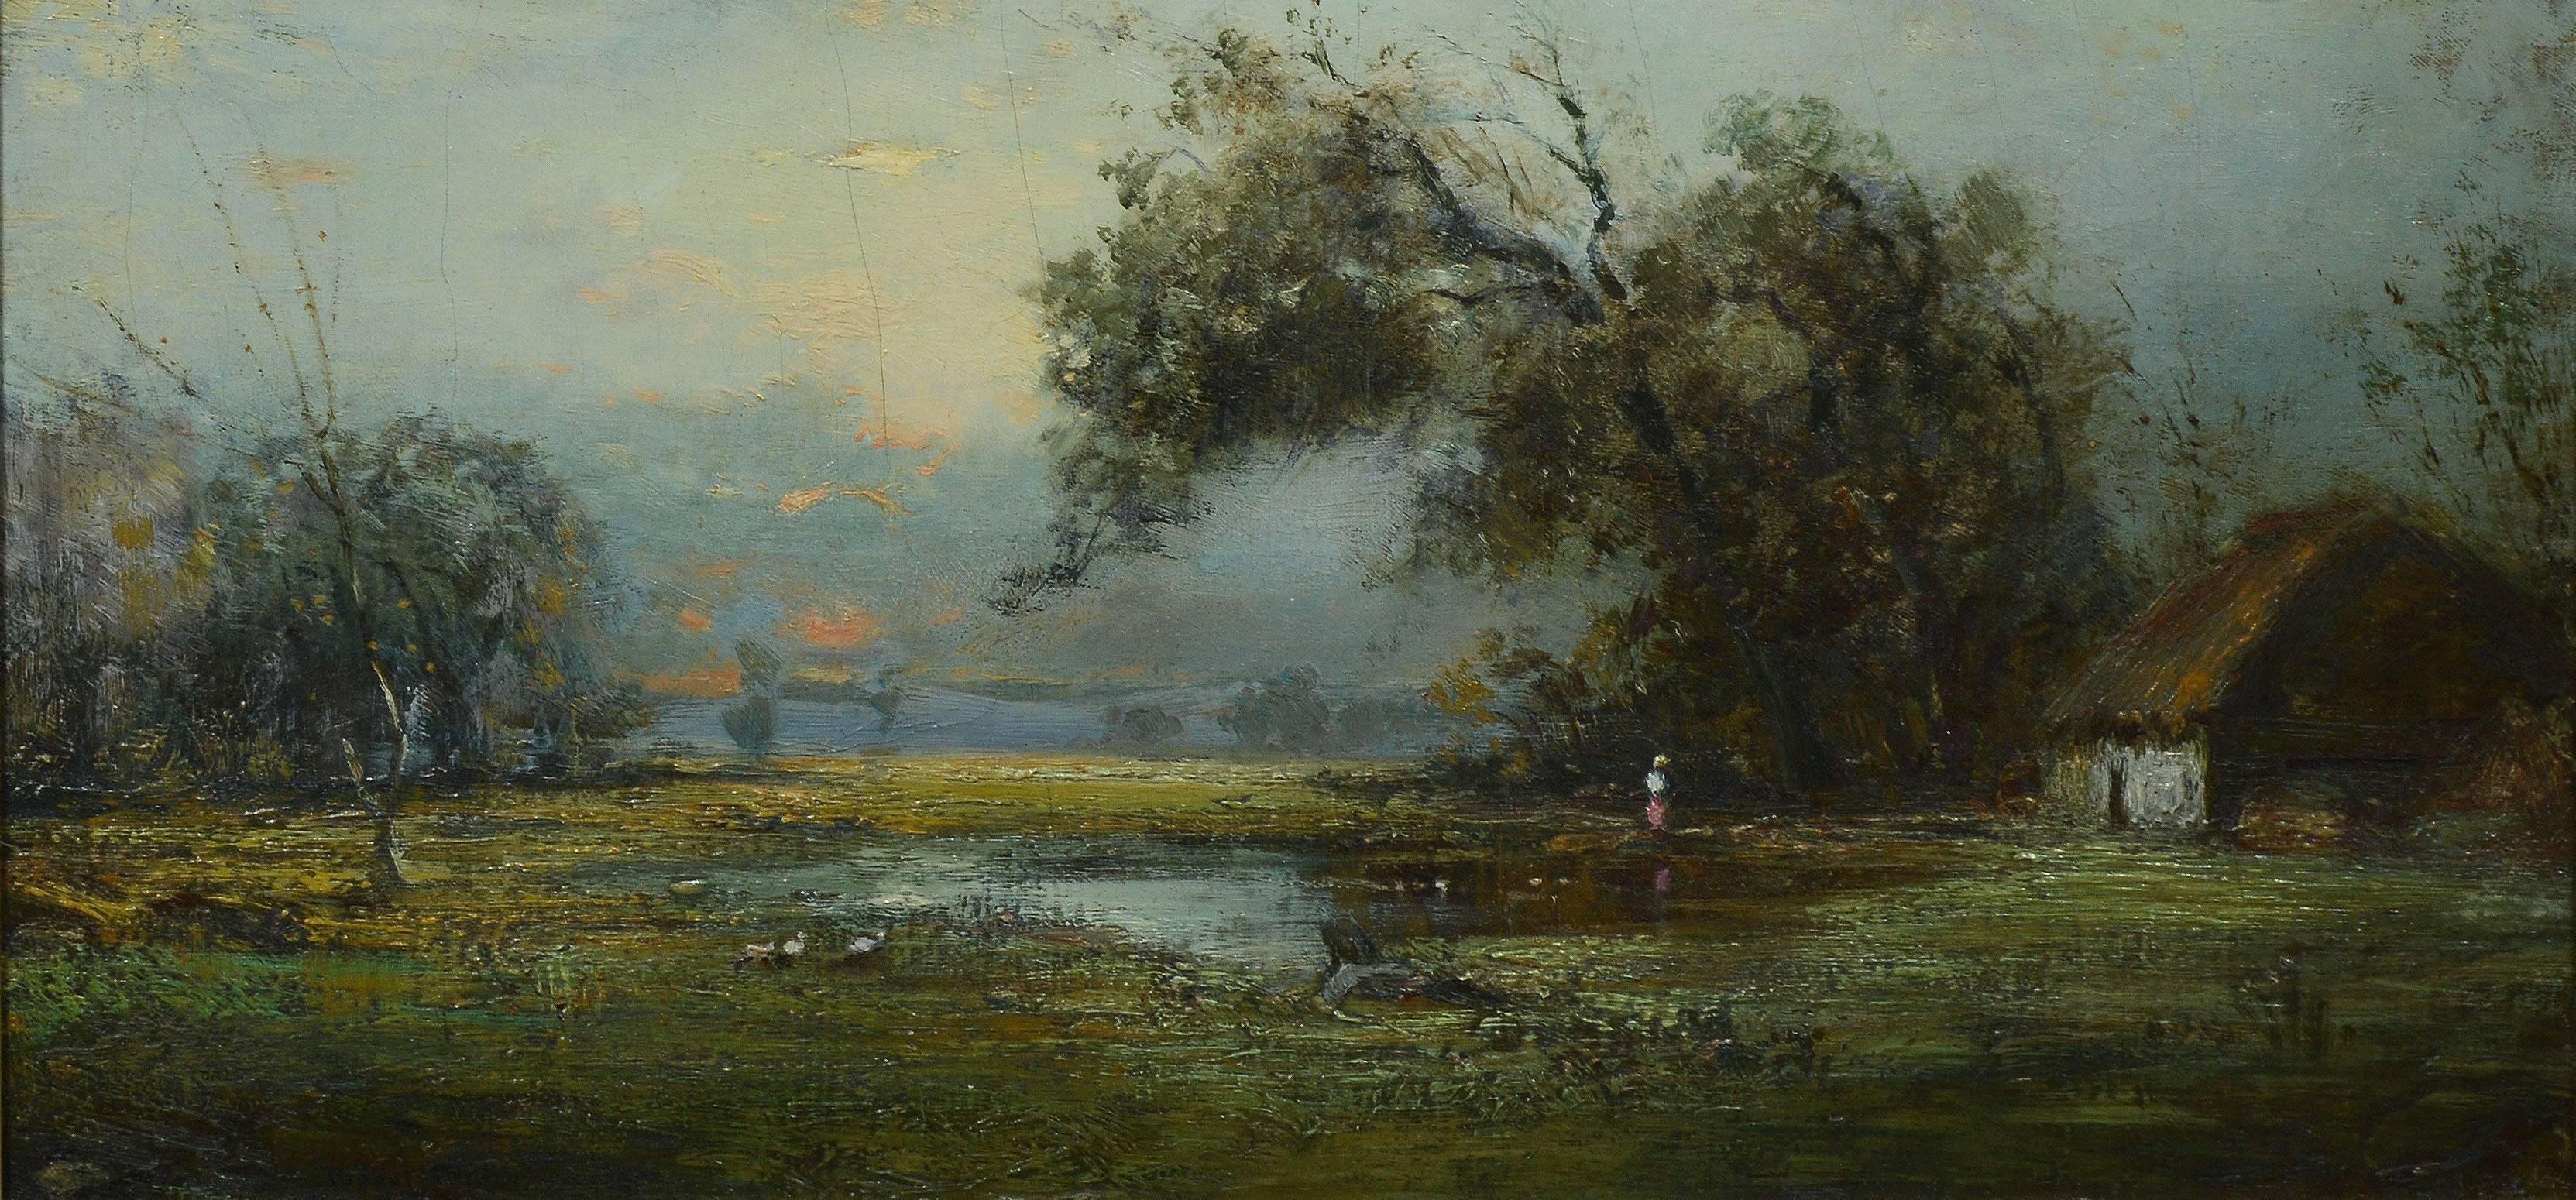 An impressionist landscape painting by Douglas Teed (1864-1929).  Oil on canvas, circa 1900.  Signed lower left.  Displayed in a giltwood frame, hanging wire included.  Image size, 28